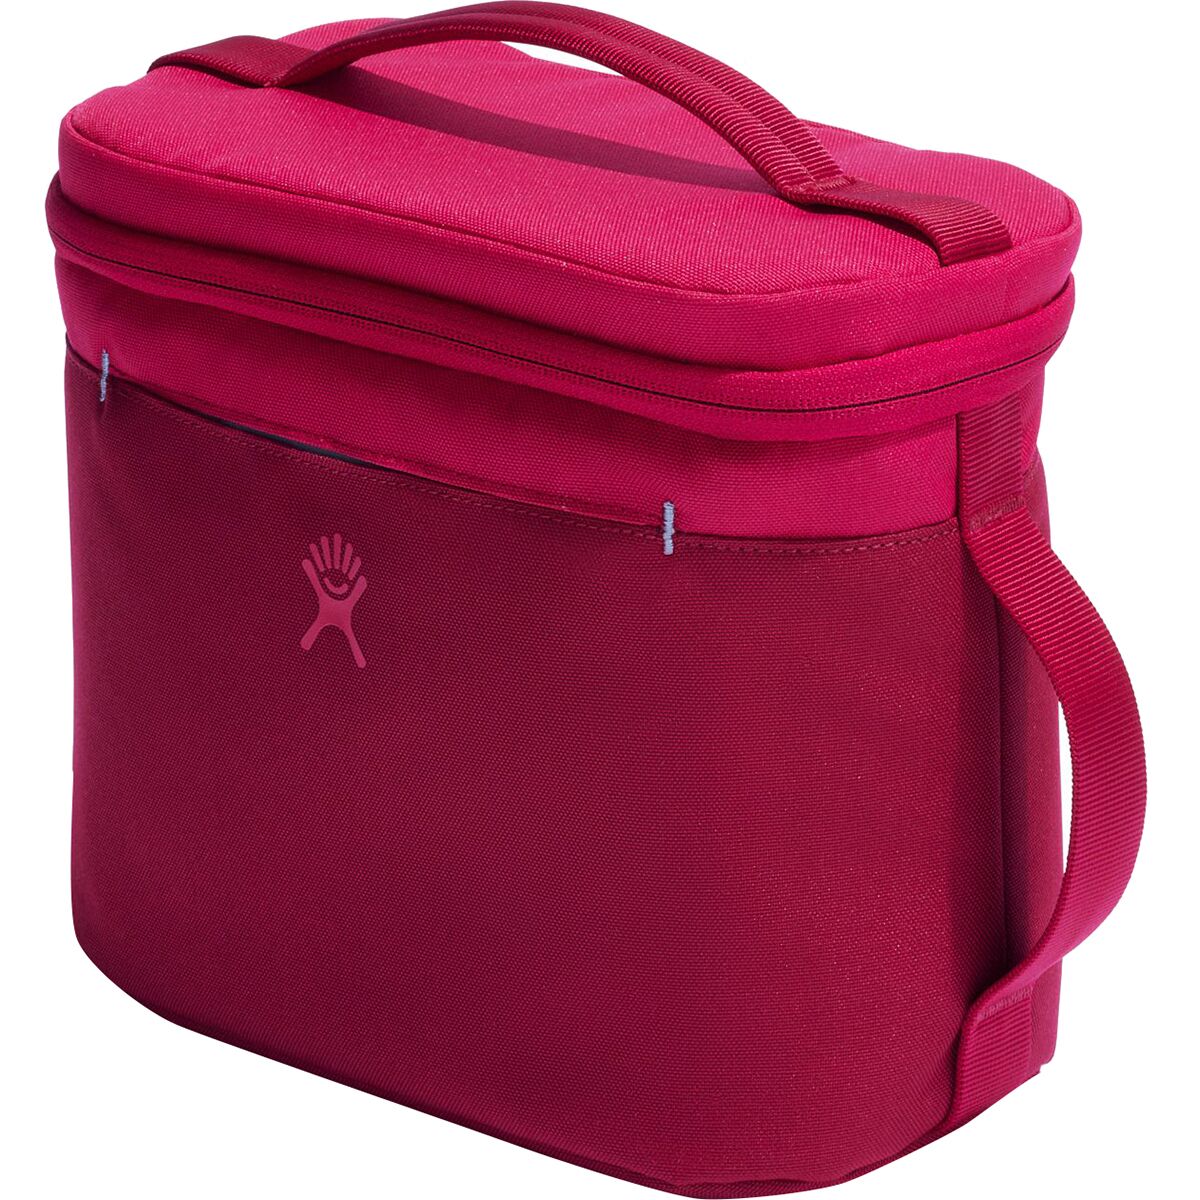 Hydro Flask LBM005 Large Insulated Lunch Box, 5 L Capacit